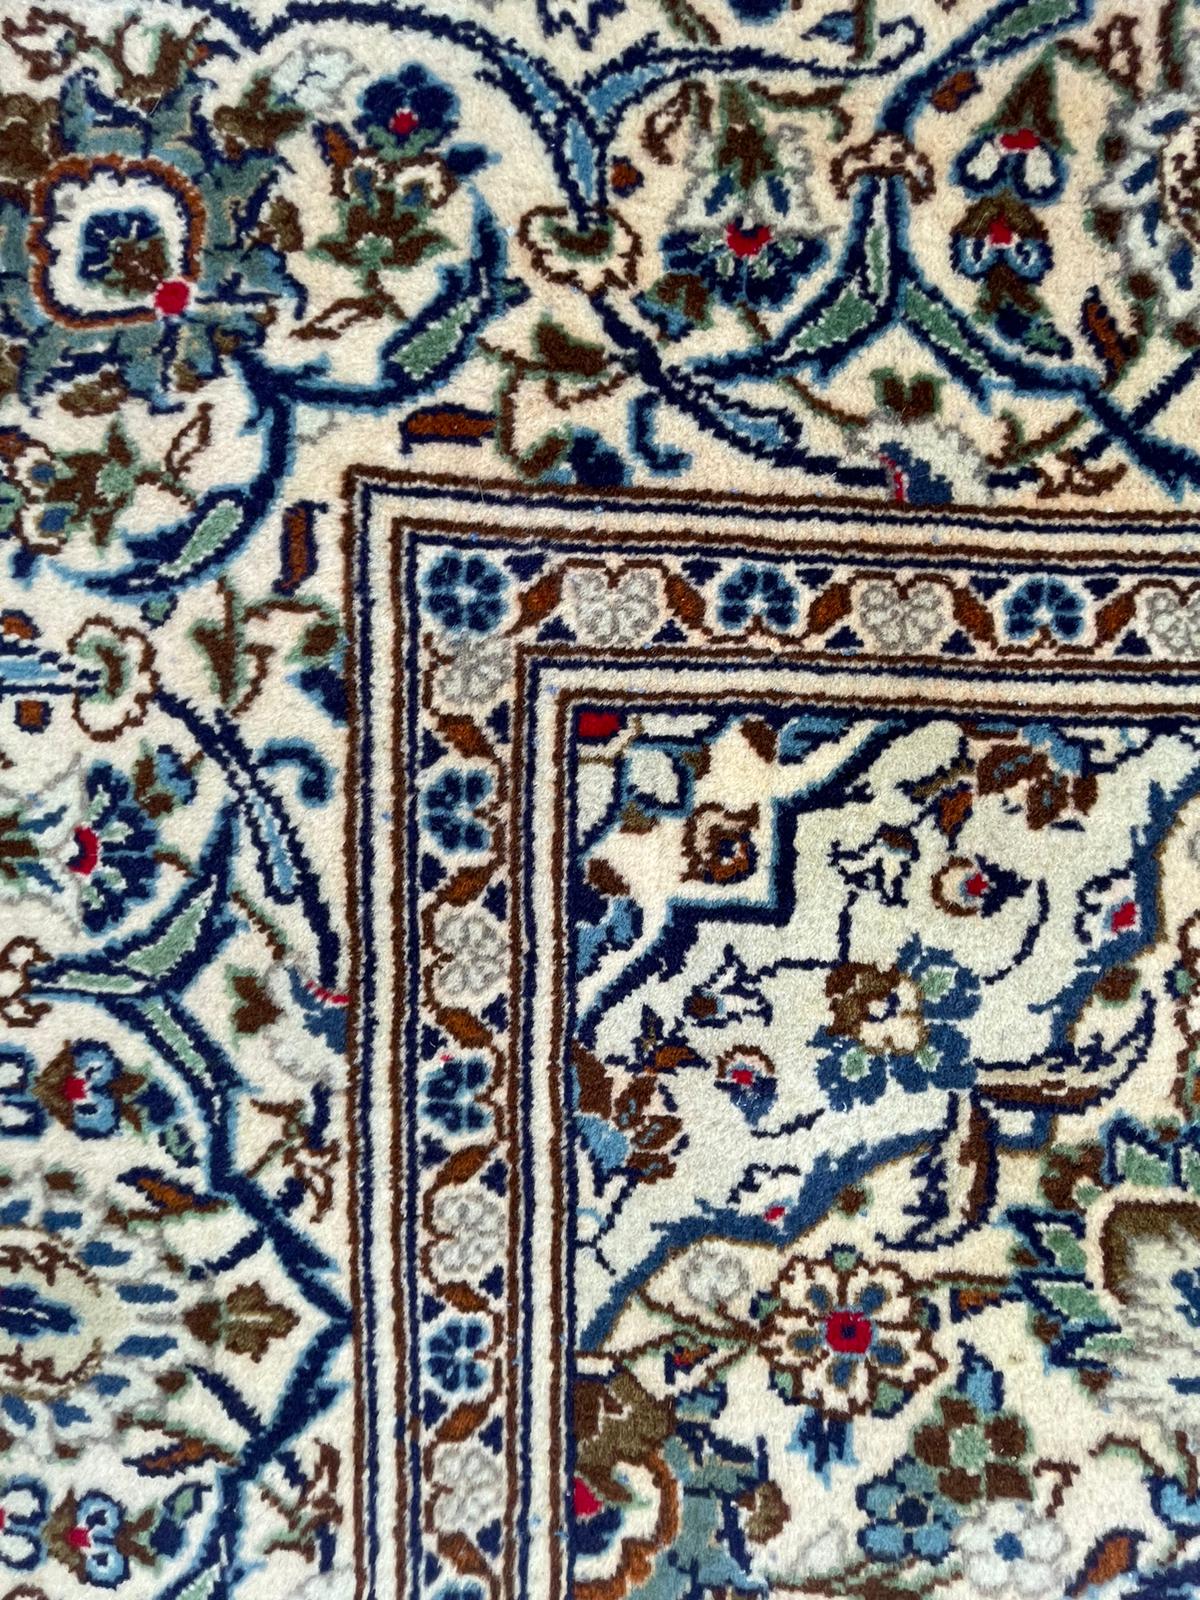 EARLY 20TH CENTURY CENTRAL PERSIAN KASHAN FLOOR CARPET RUG - Image 3 of 5